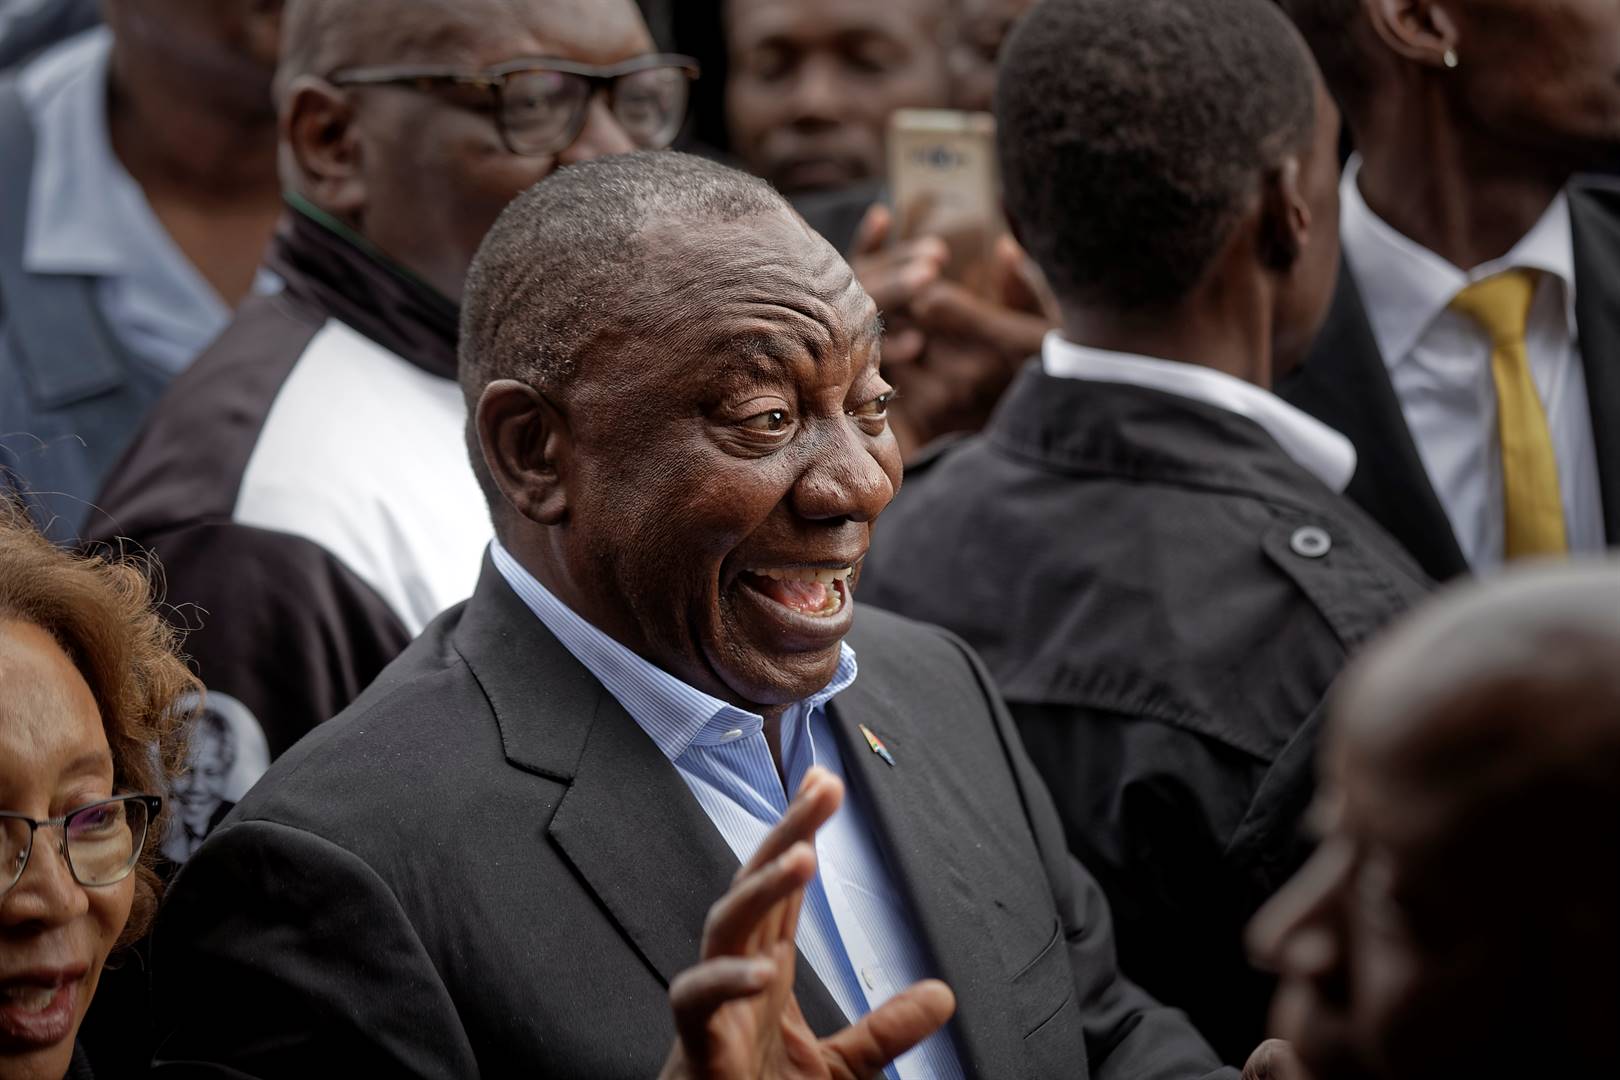 President Cyril Ramaphosa greets supporters after casting his vote at the Hitekani Primary School in Soweto. PIcture: Ben Curtis/AP